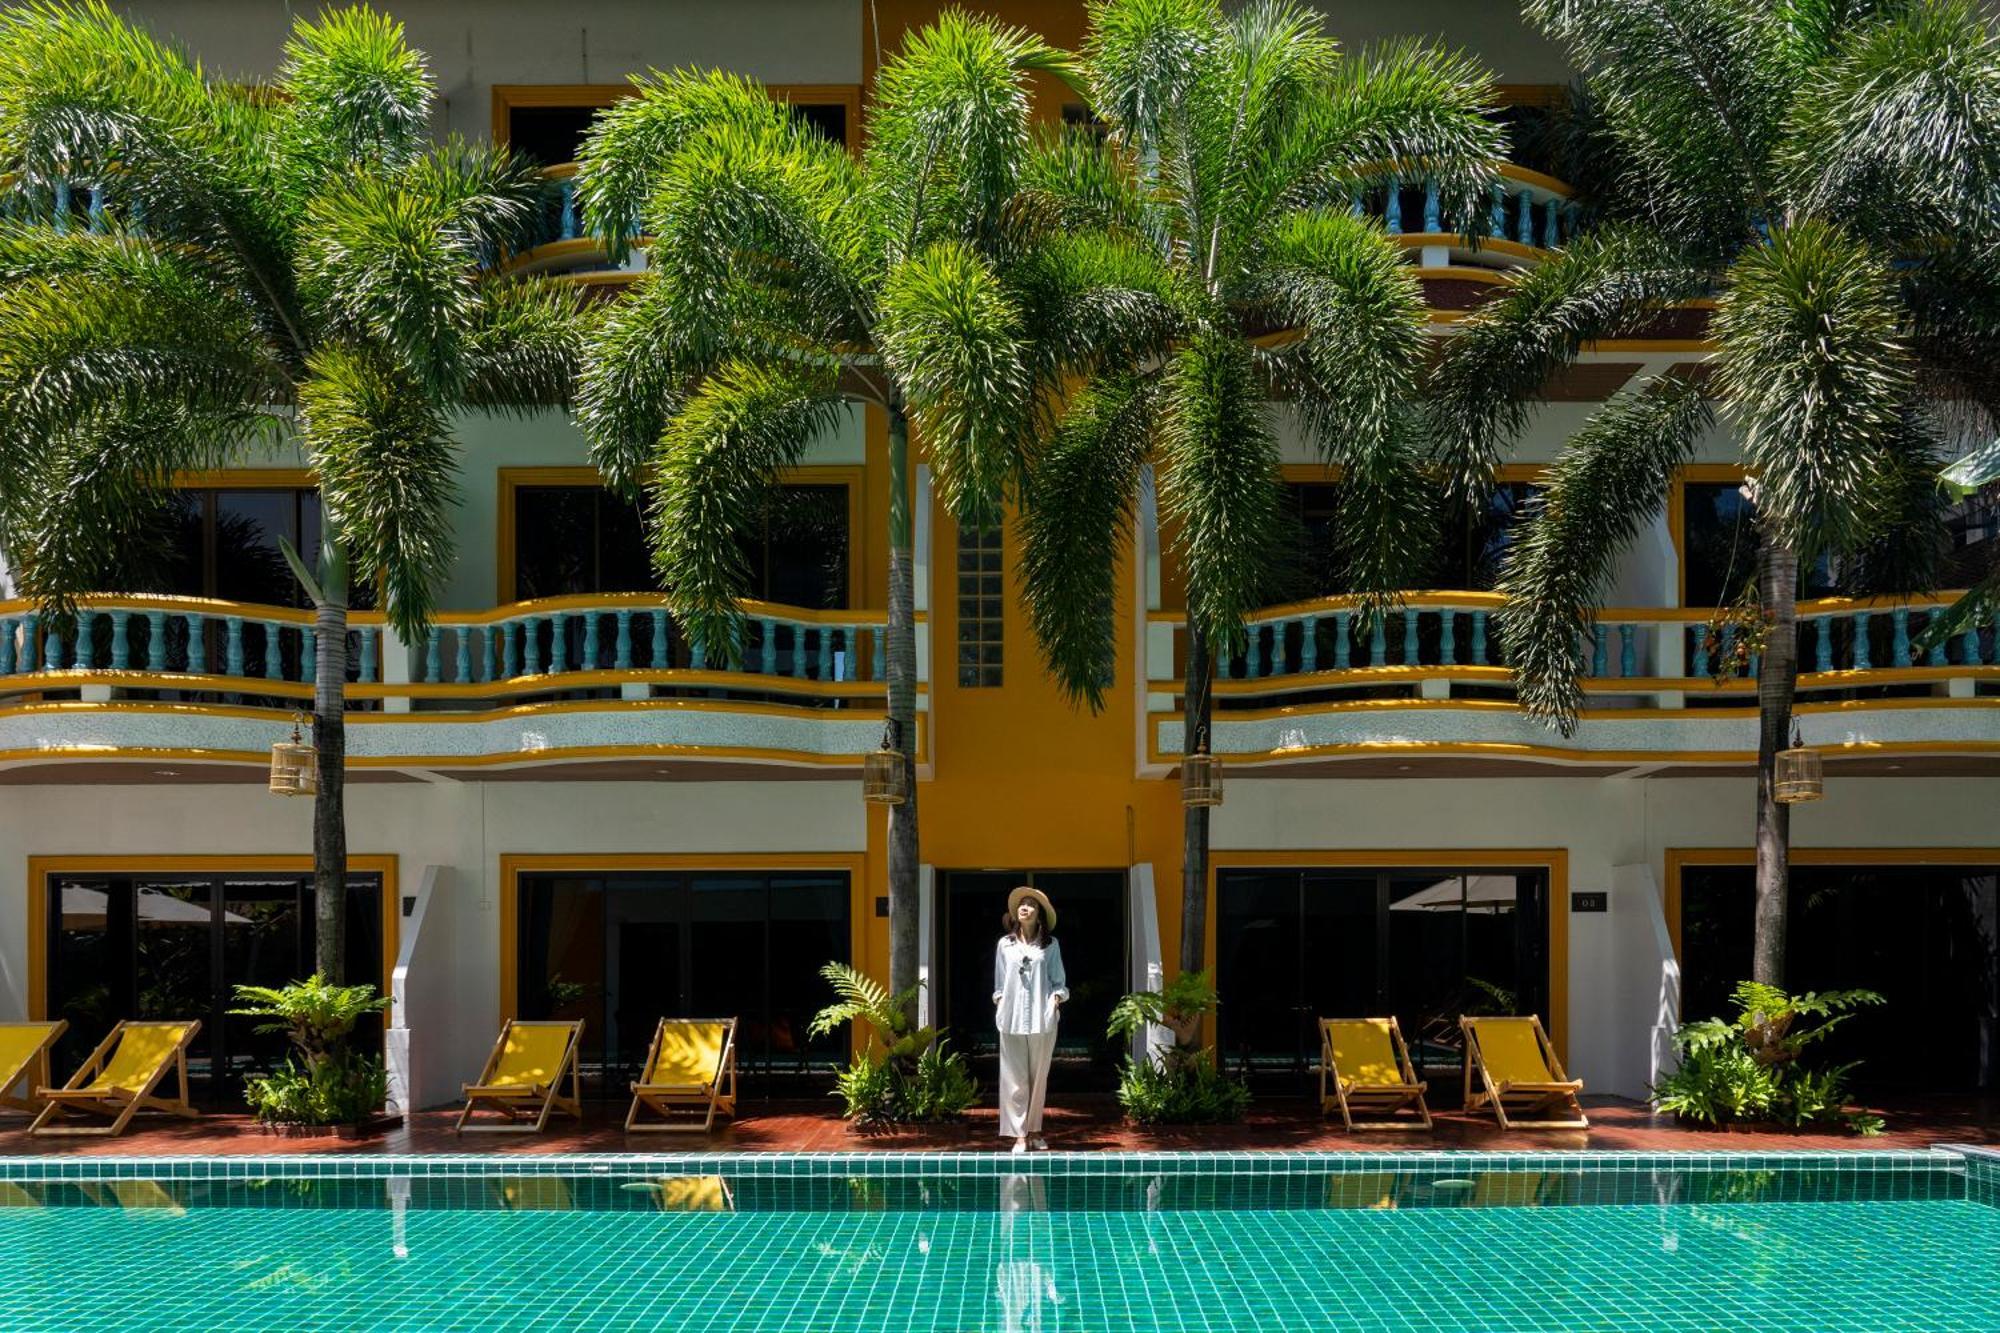 Buasri Boutique Patong Hotel Exterior photo